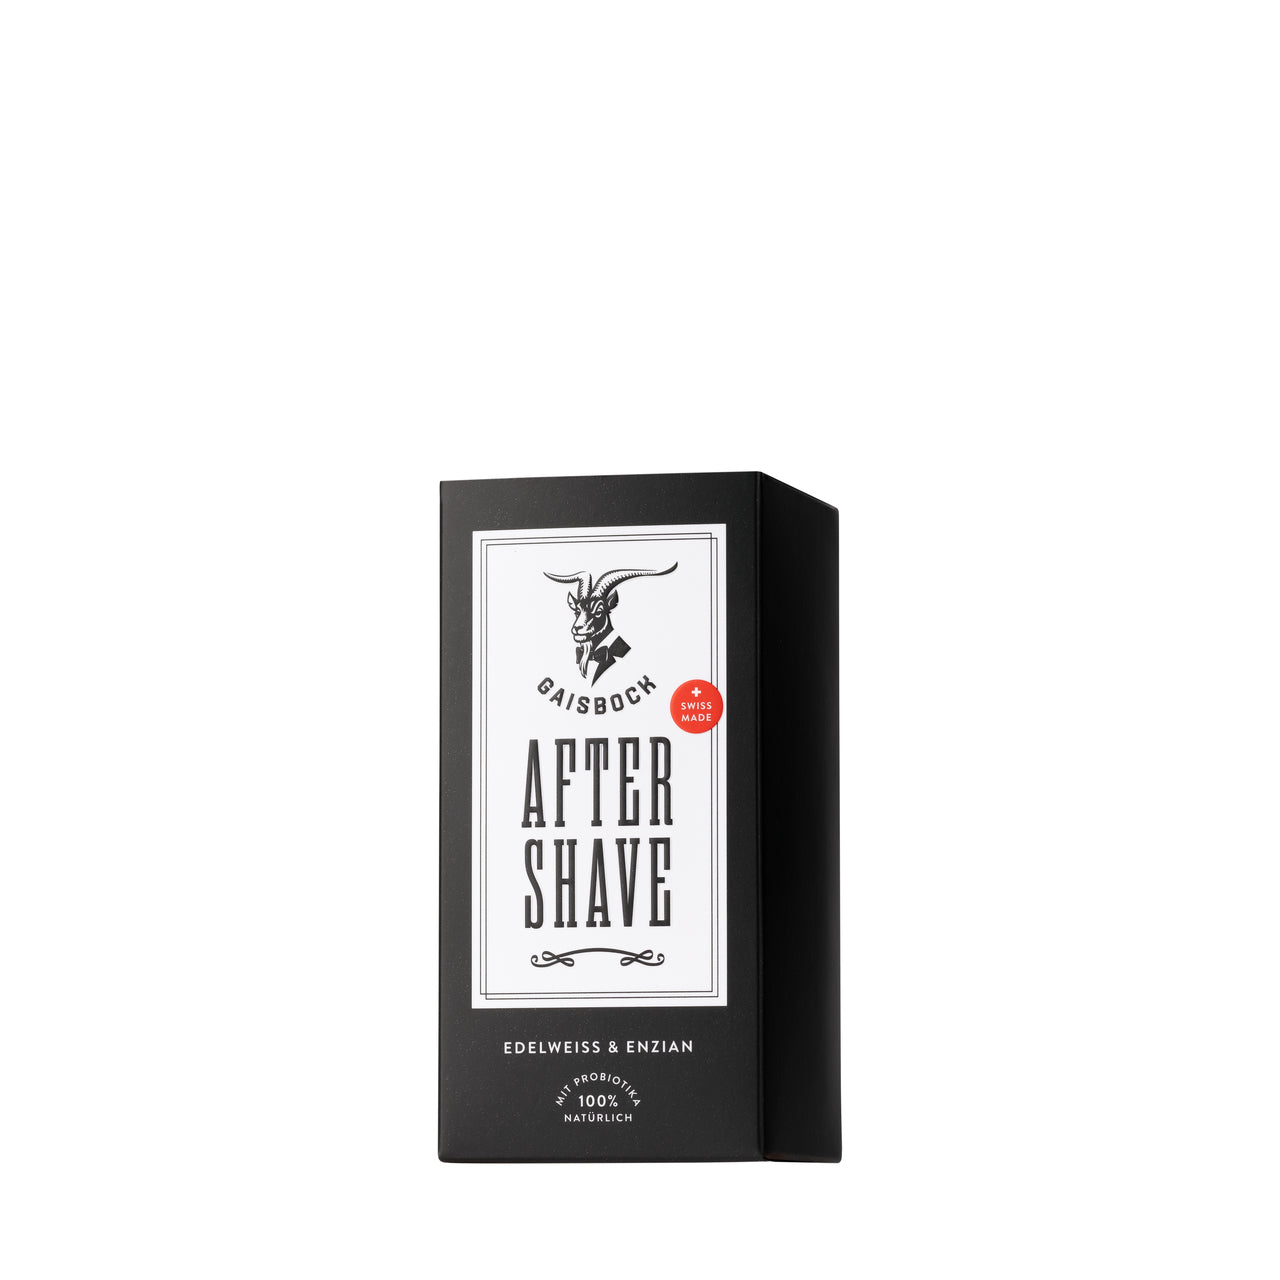 AFTER SHAVE 100 ml